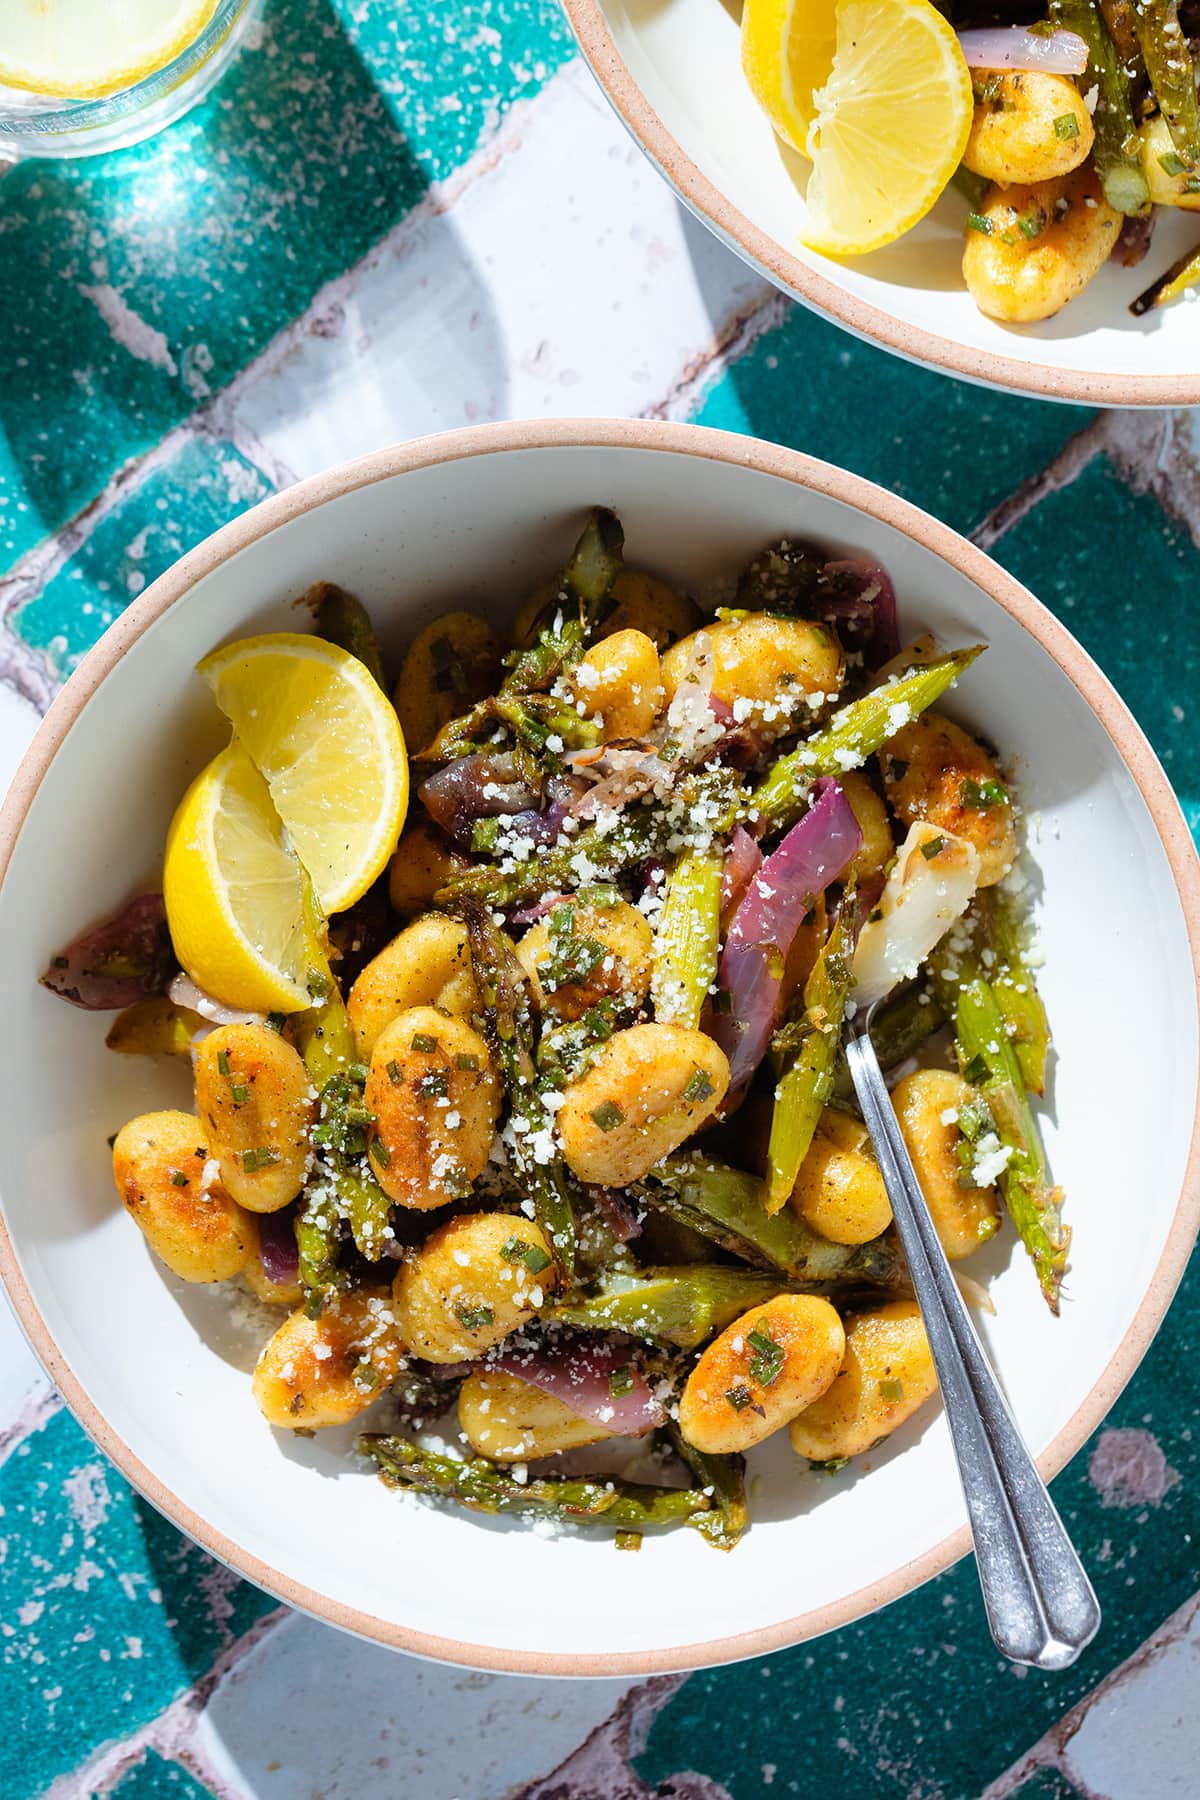 Crispy golden gnocchi with roasted asparagus, red onion, and pecorino in a white bowl with lemon wedges on the side.